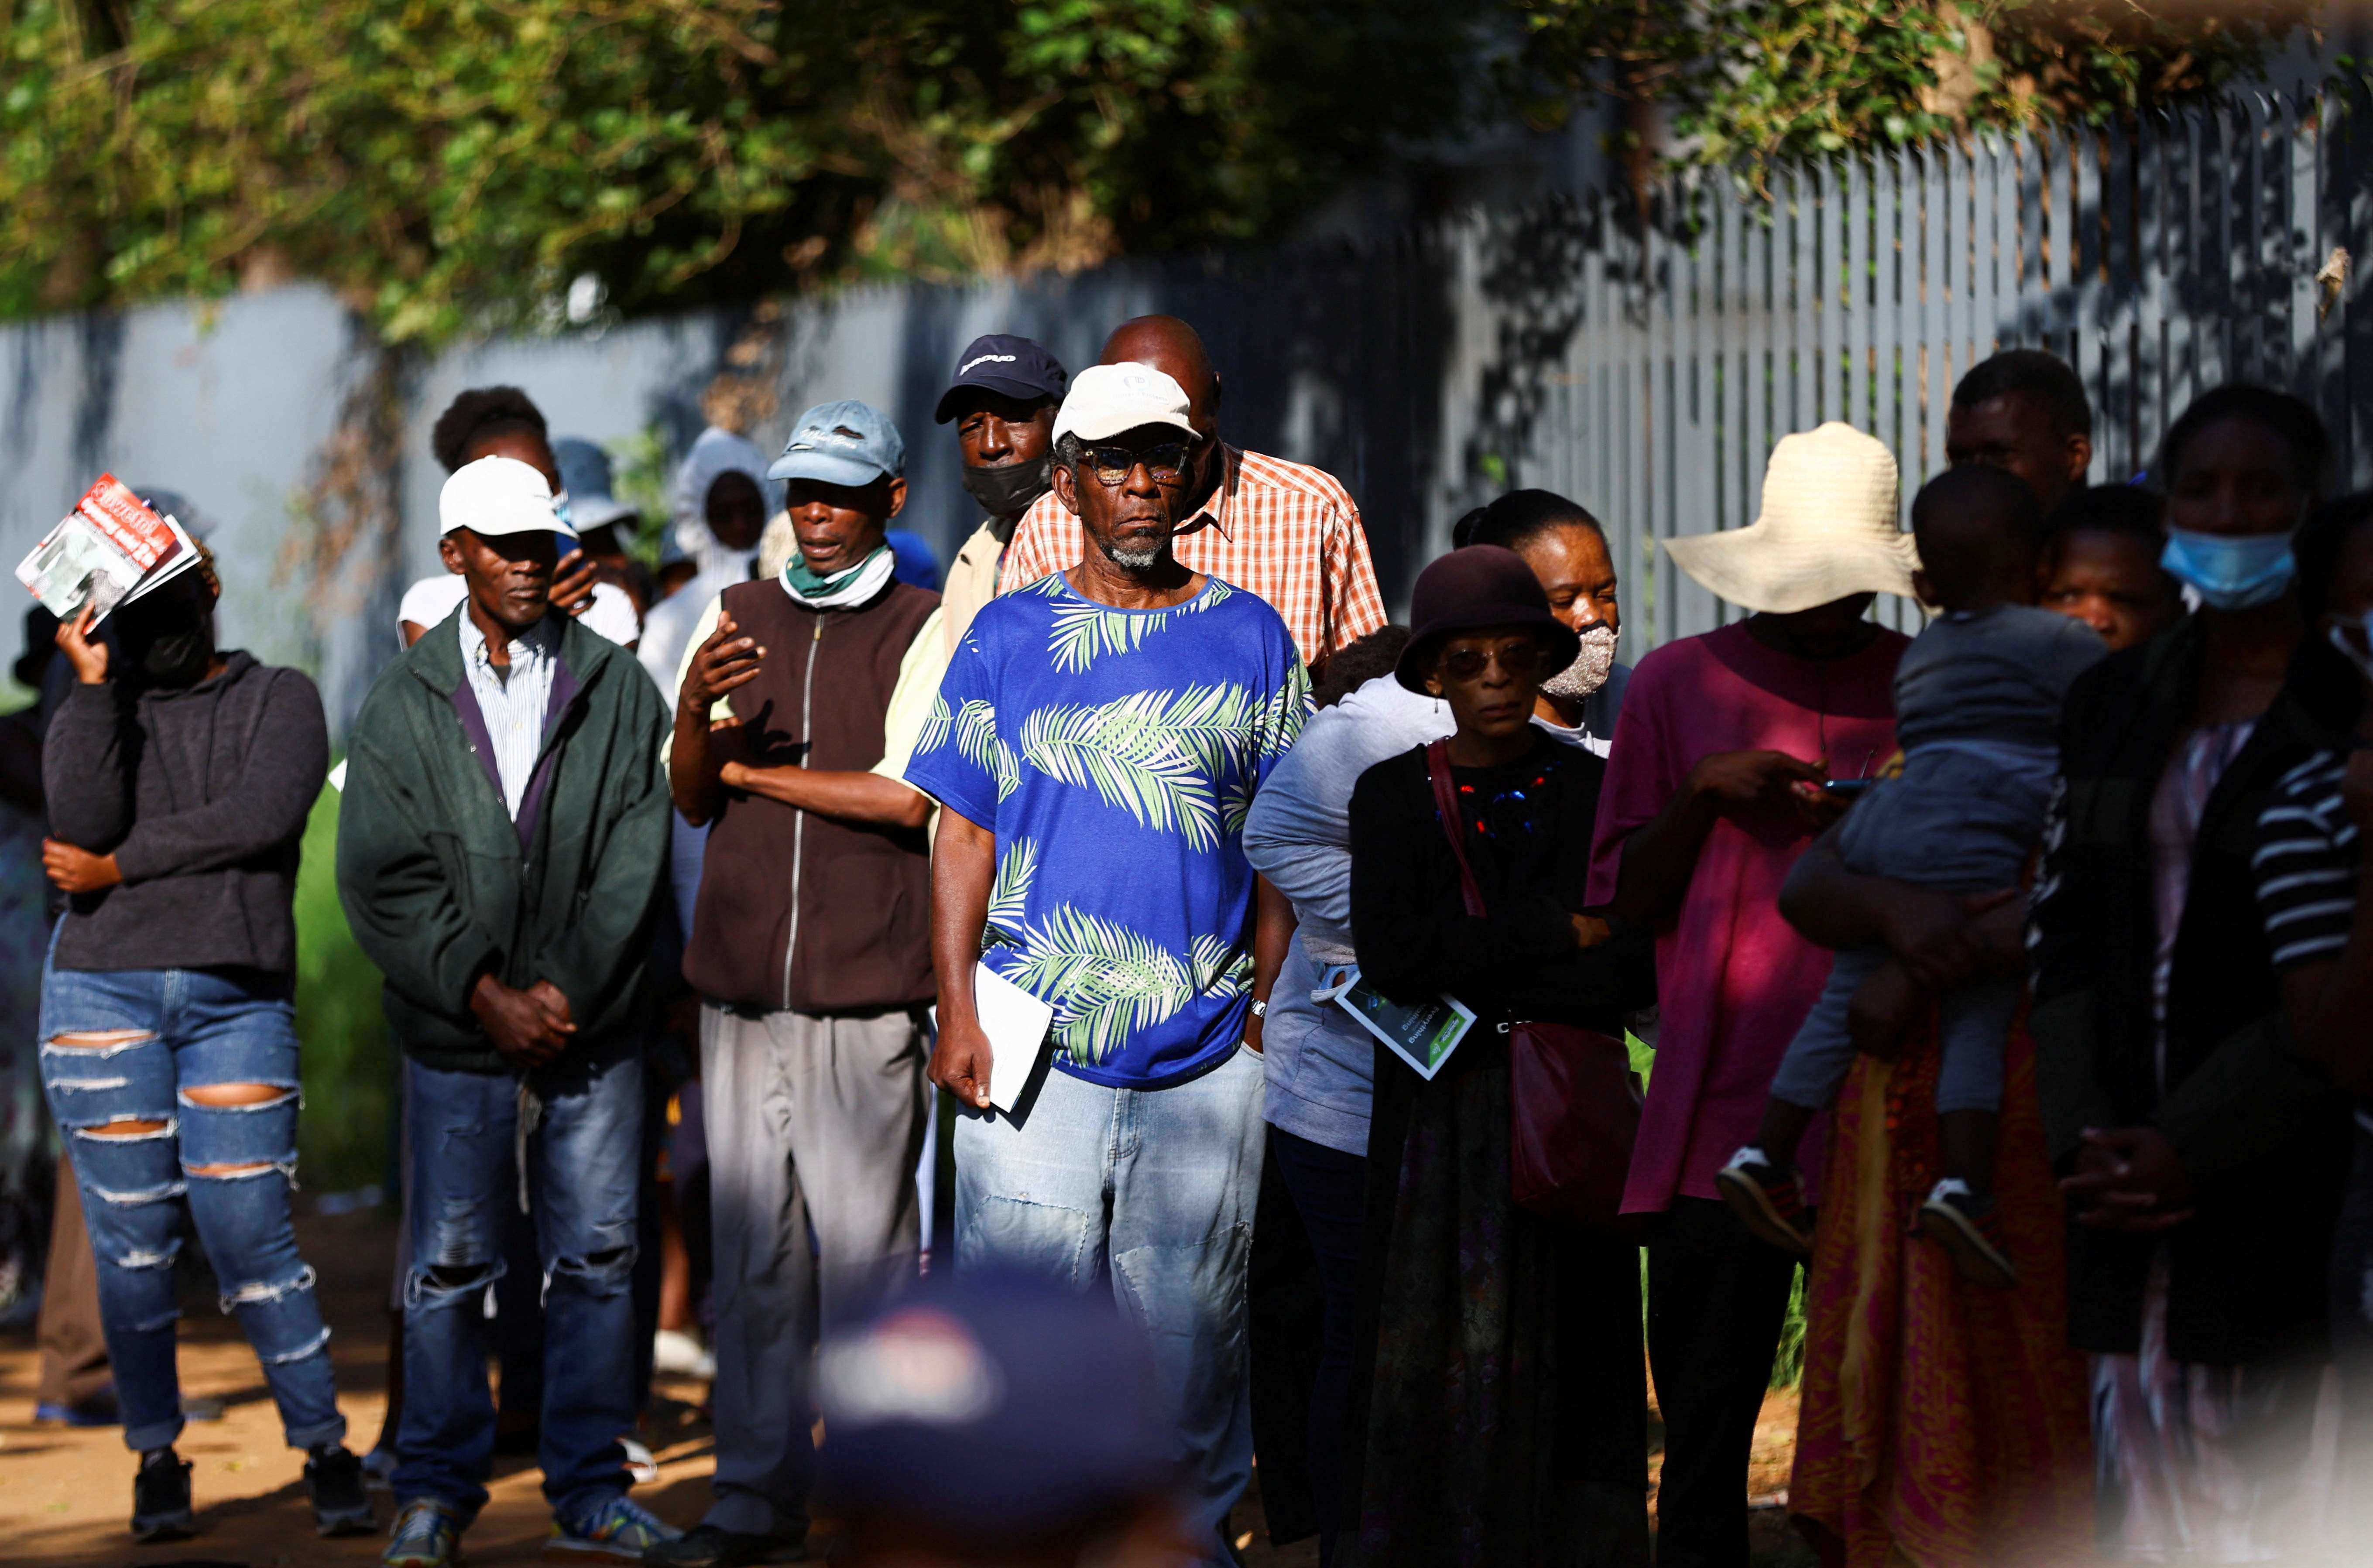 Almost 8mln now unemployed in SA